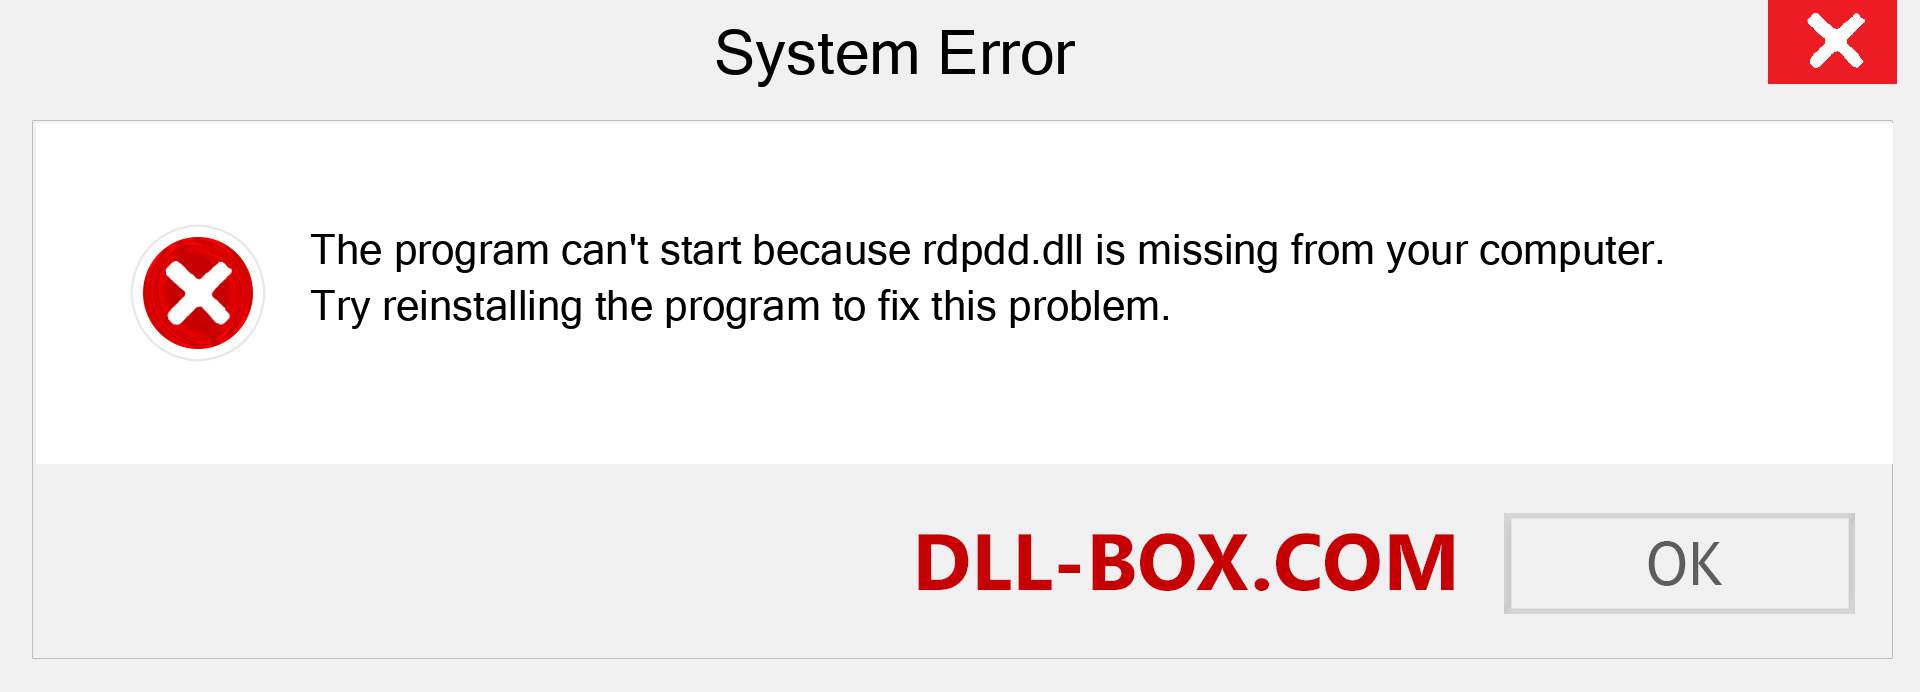  rdpdd.dll file is missing?. Download for Windows 7, 8, 10 - Fix  rdpdd dll Missing Error on Windows, photos, images